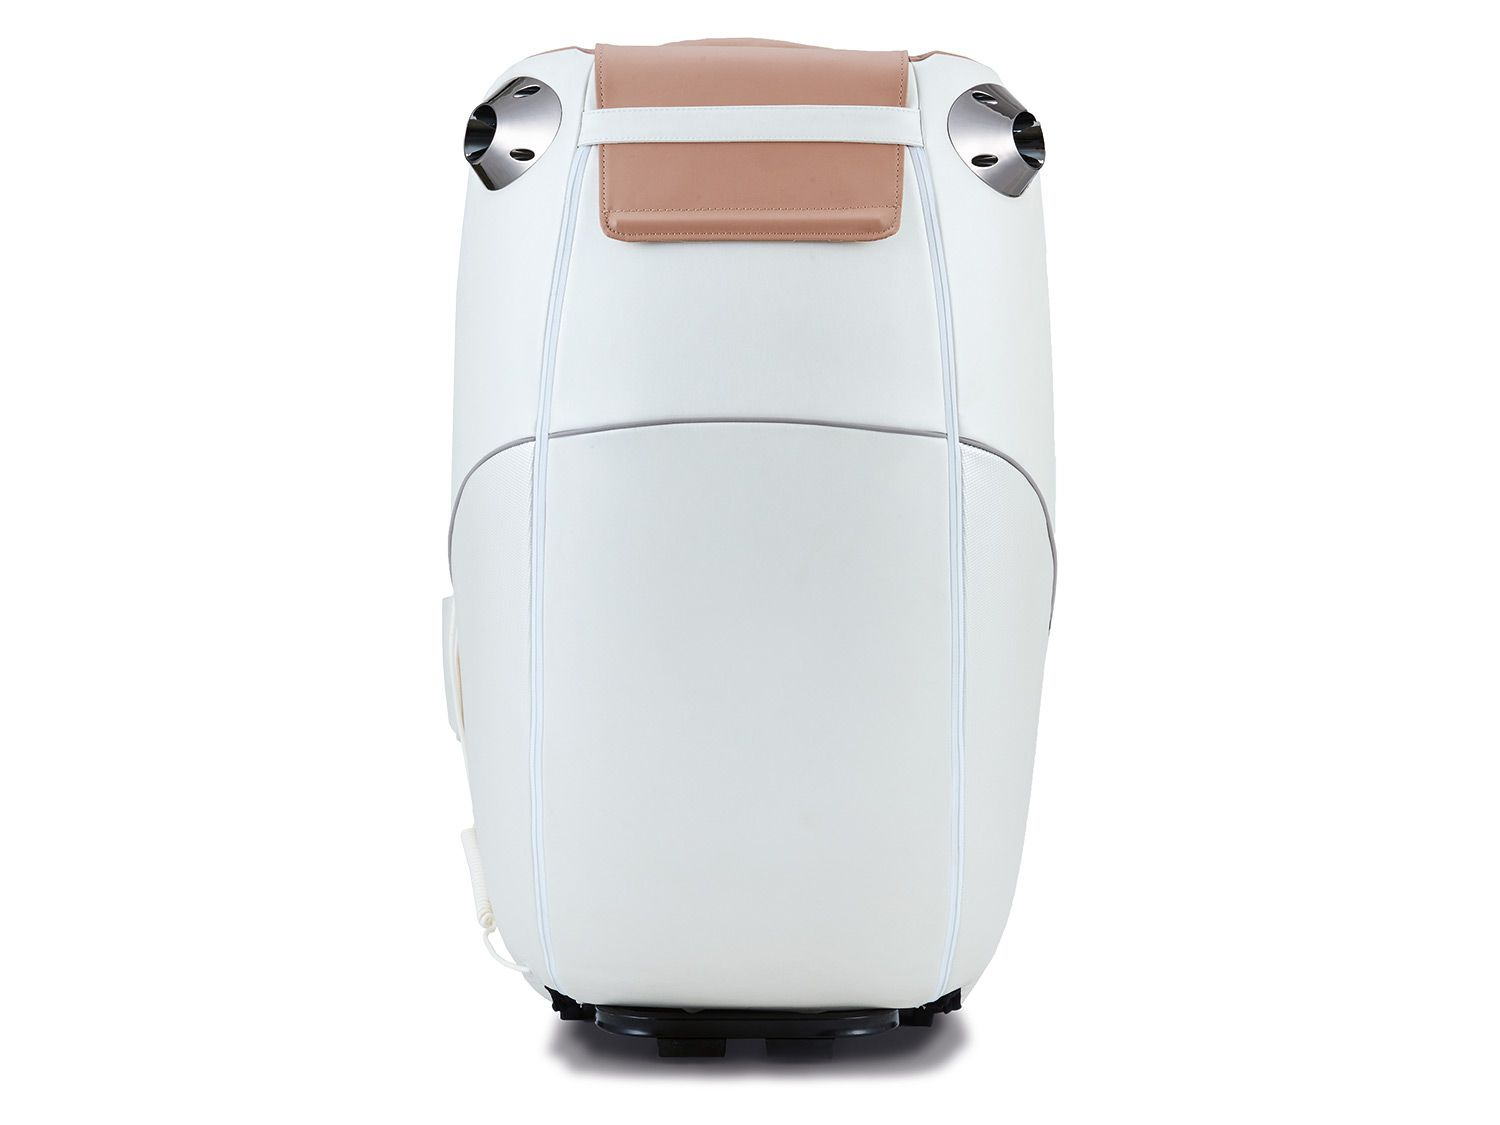 Synca CirC Compact Massagesessel Beige | LIDL